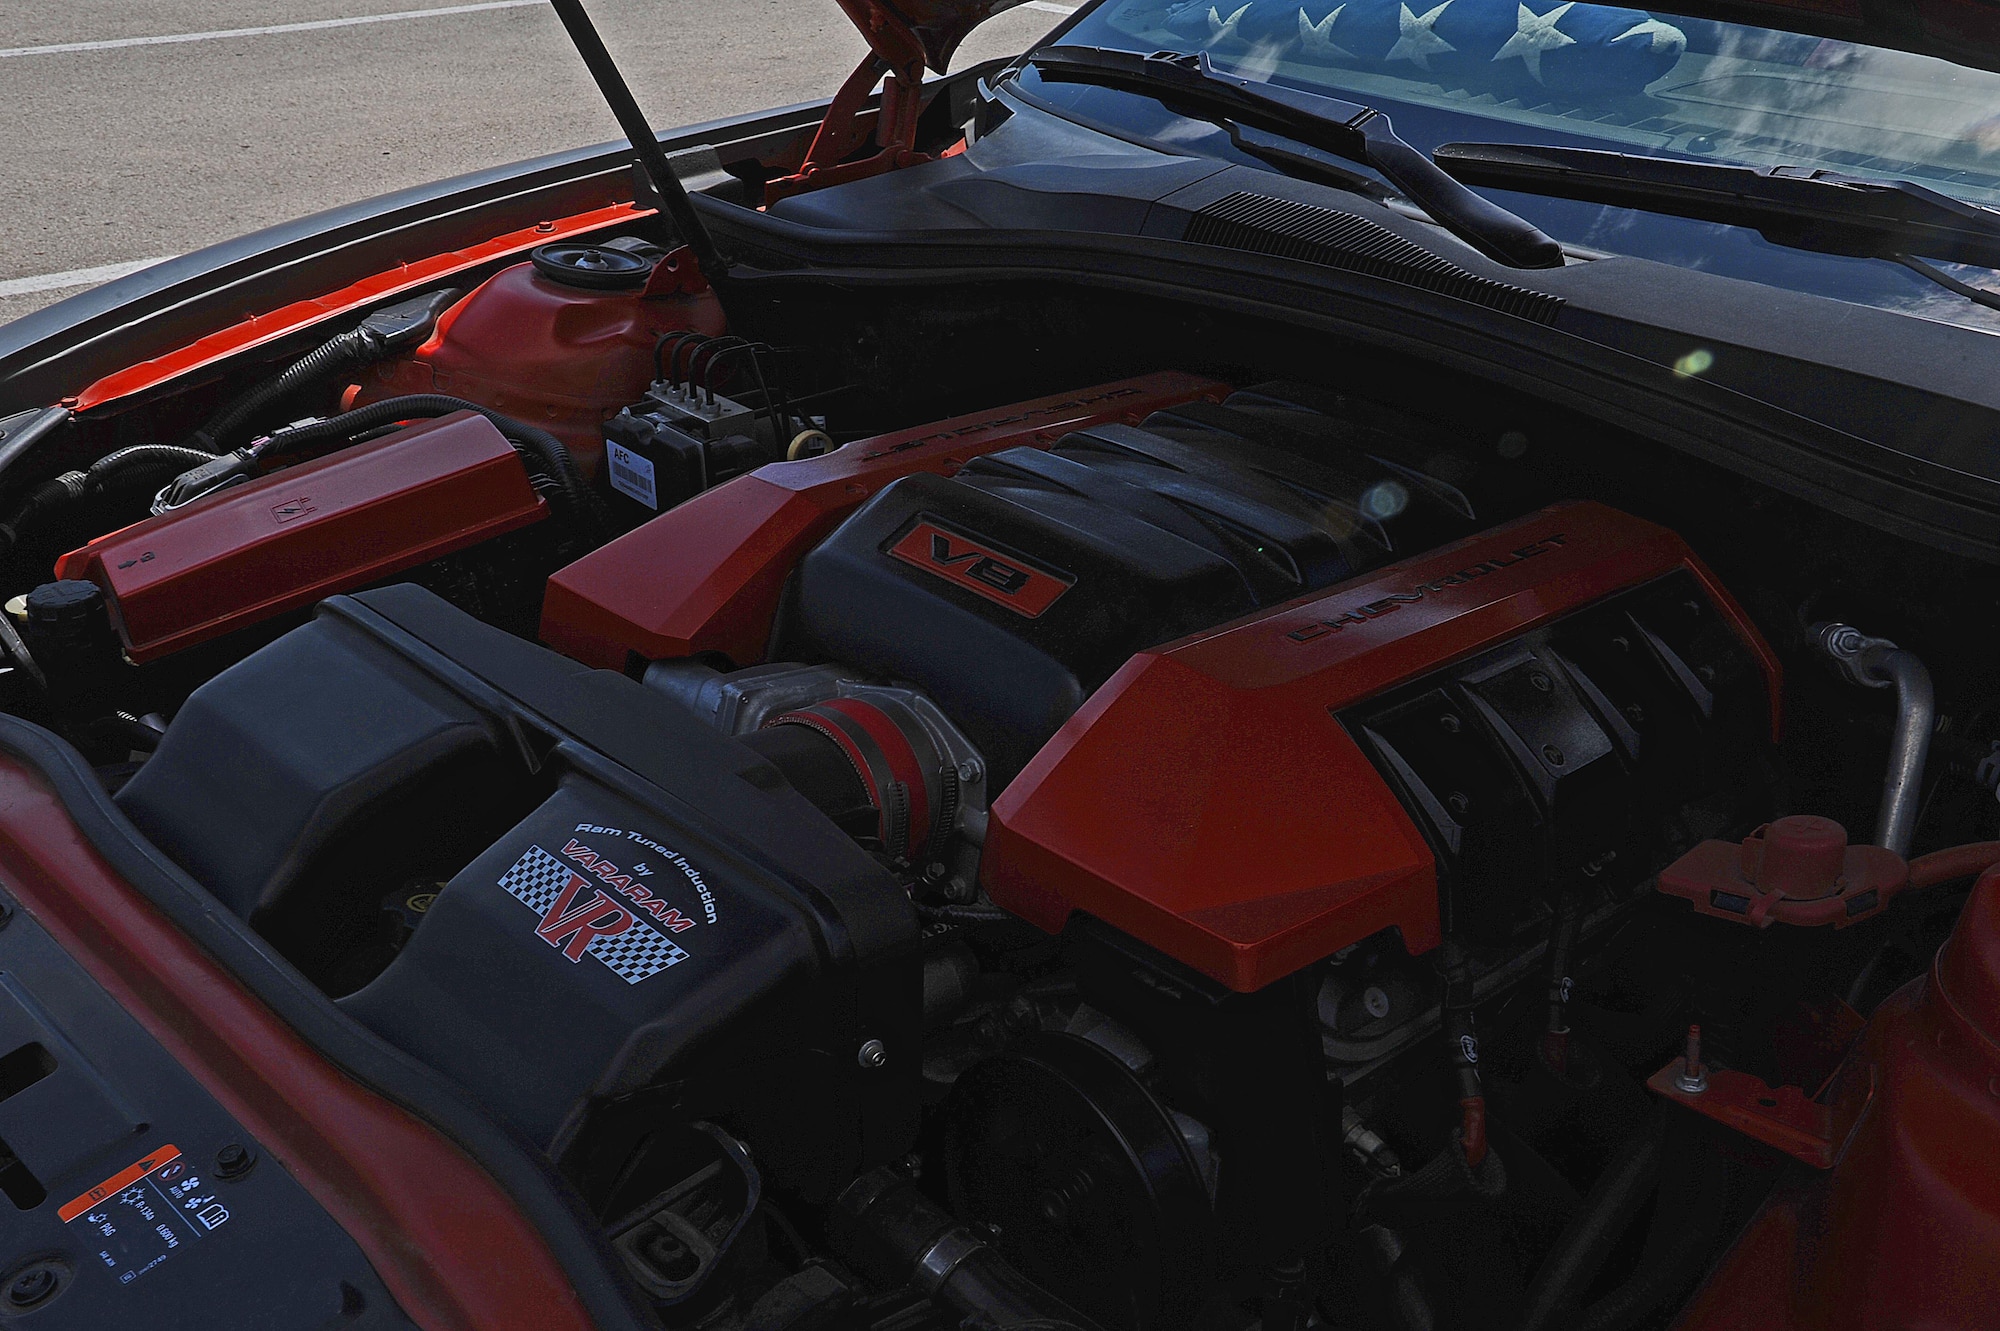 An eight cylinder engine rumbles inside a Chevy Camaro while the sun shines on a folded up American flag at Goodfellow Air Force Base, Aug. 18, 2015. U.S. Air Force Tech. Sgt. Stephen Strong, 315th Training Squadron instructor painted the red pieces on the internal parts of his Camaro. (U.S. Air Force photo by Airman Caelynn Ferguson/Released)